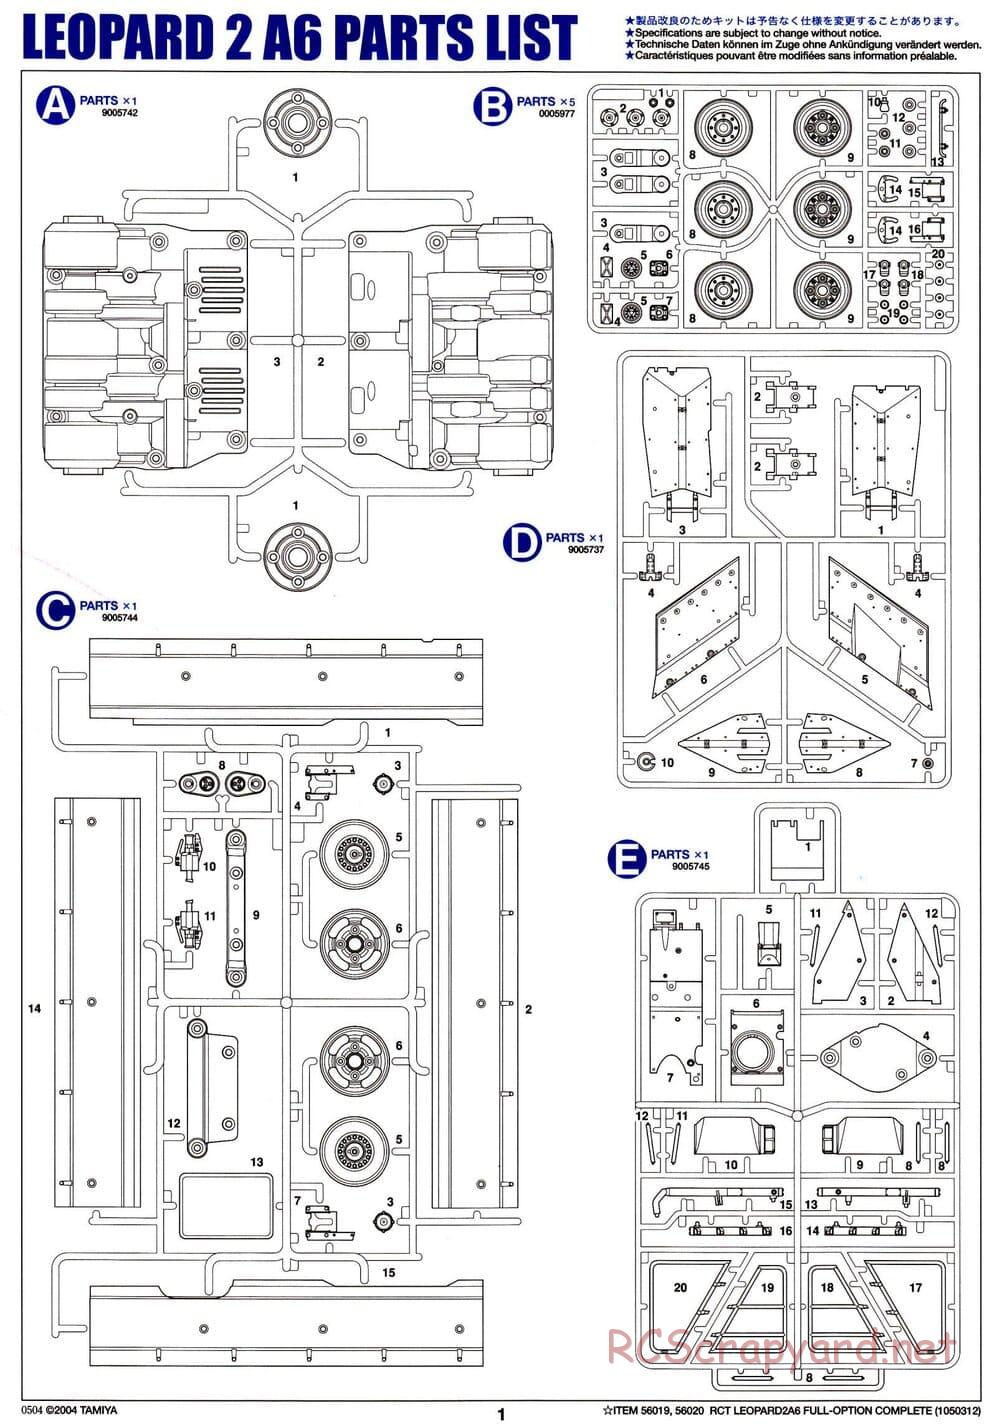 Tamiya - Leopard 2 A6 - 1/16 Scale Chassis - Parts 1